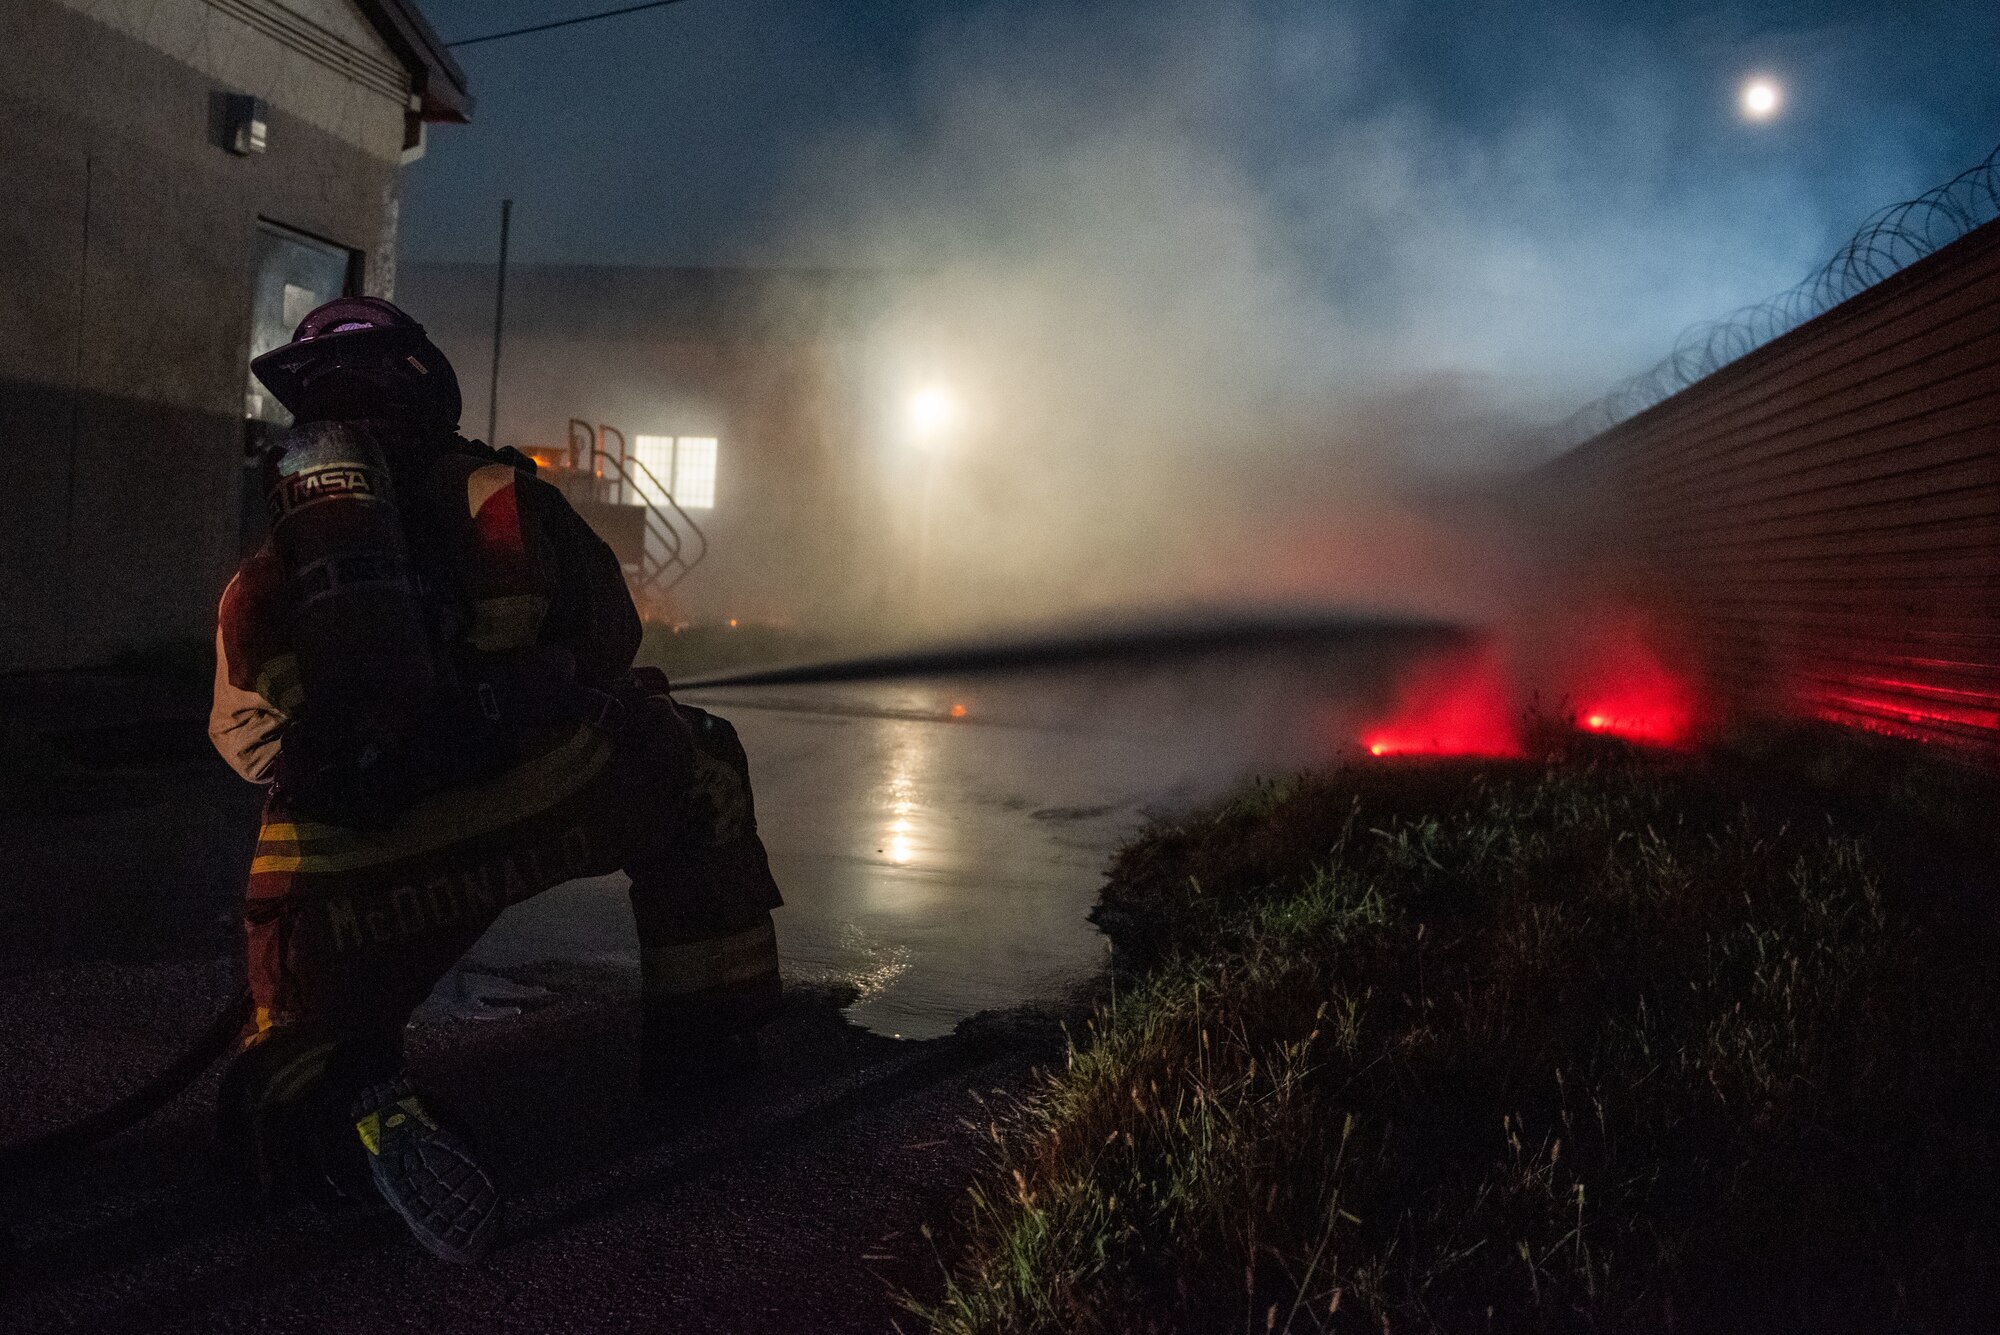 U.S. Air Force Senior Airman Corey McDonald, 51st Civil Engineer Squadron lead firefighter, extinguishes a simulated fire during a fire response scenario at Osan Air Base, Republic of Korea, Sept. 12, 2022, in support of a wing training event.